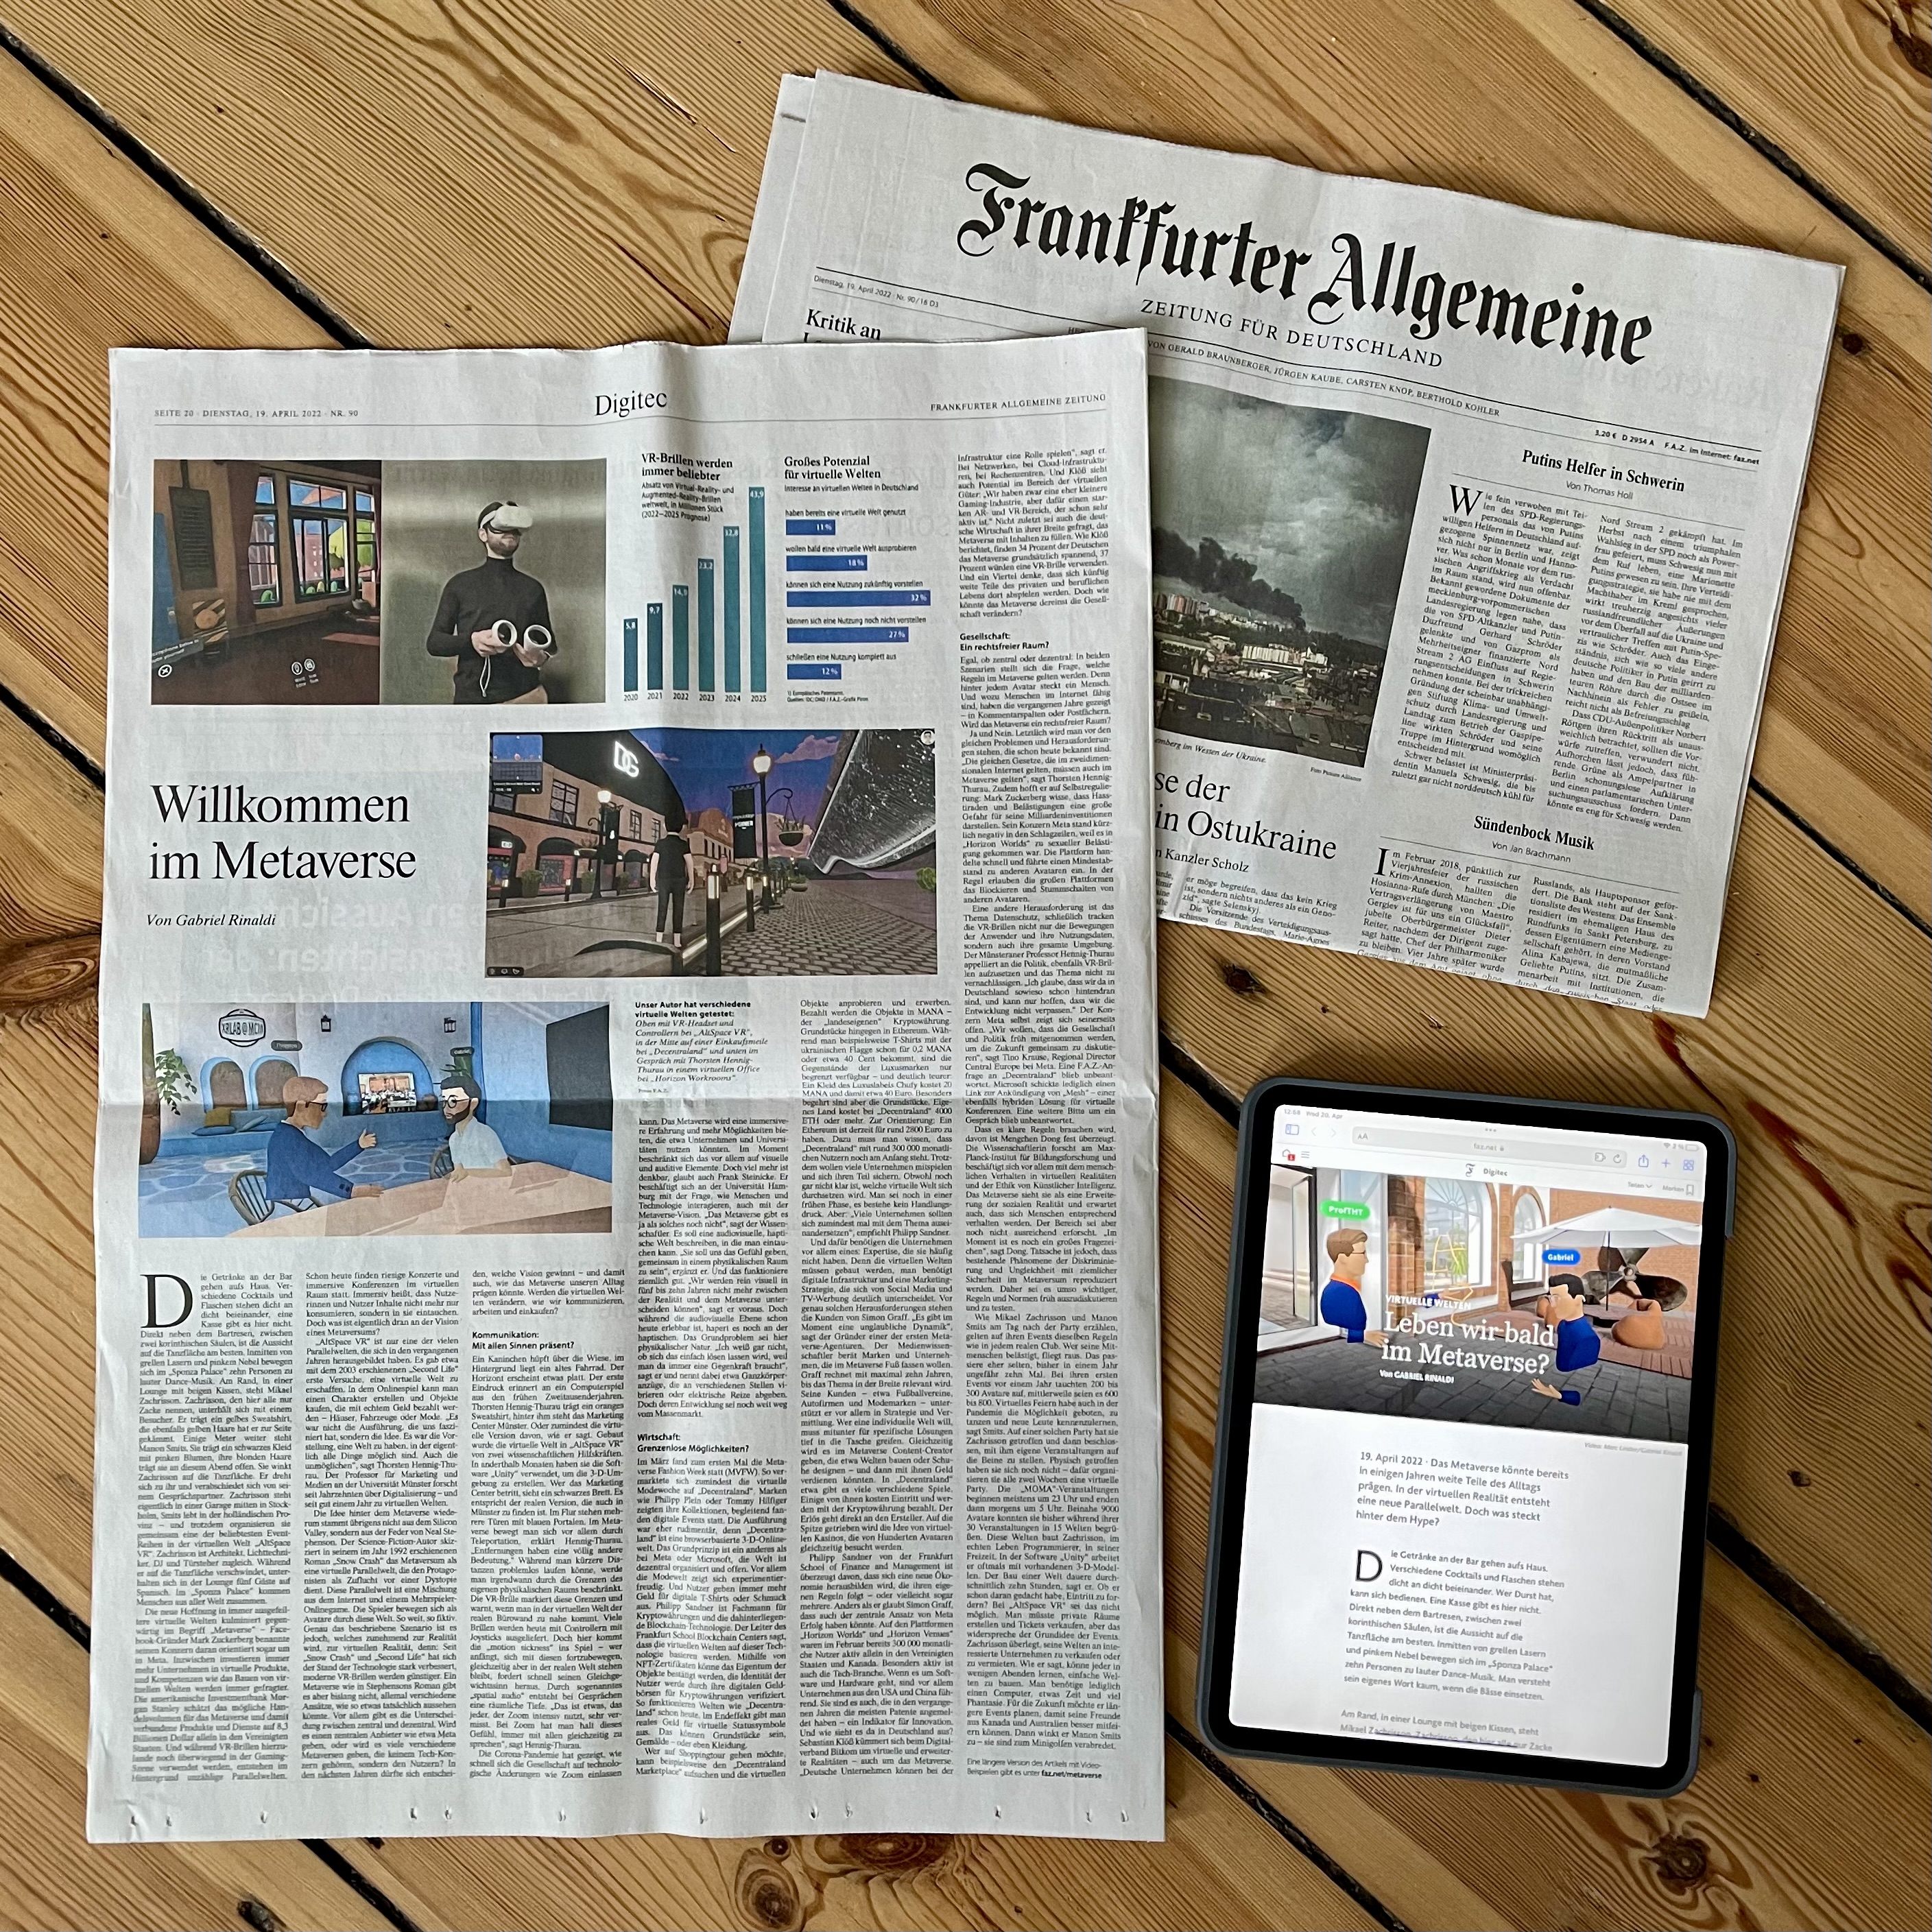 A newspaper and a tablet show an article about the Metaverse published in the Frankfurter Allgemeine Zeitung and on FAZ.NET, photographed by Gabriel Rinaldi